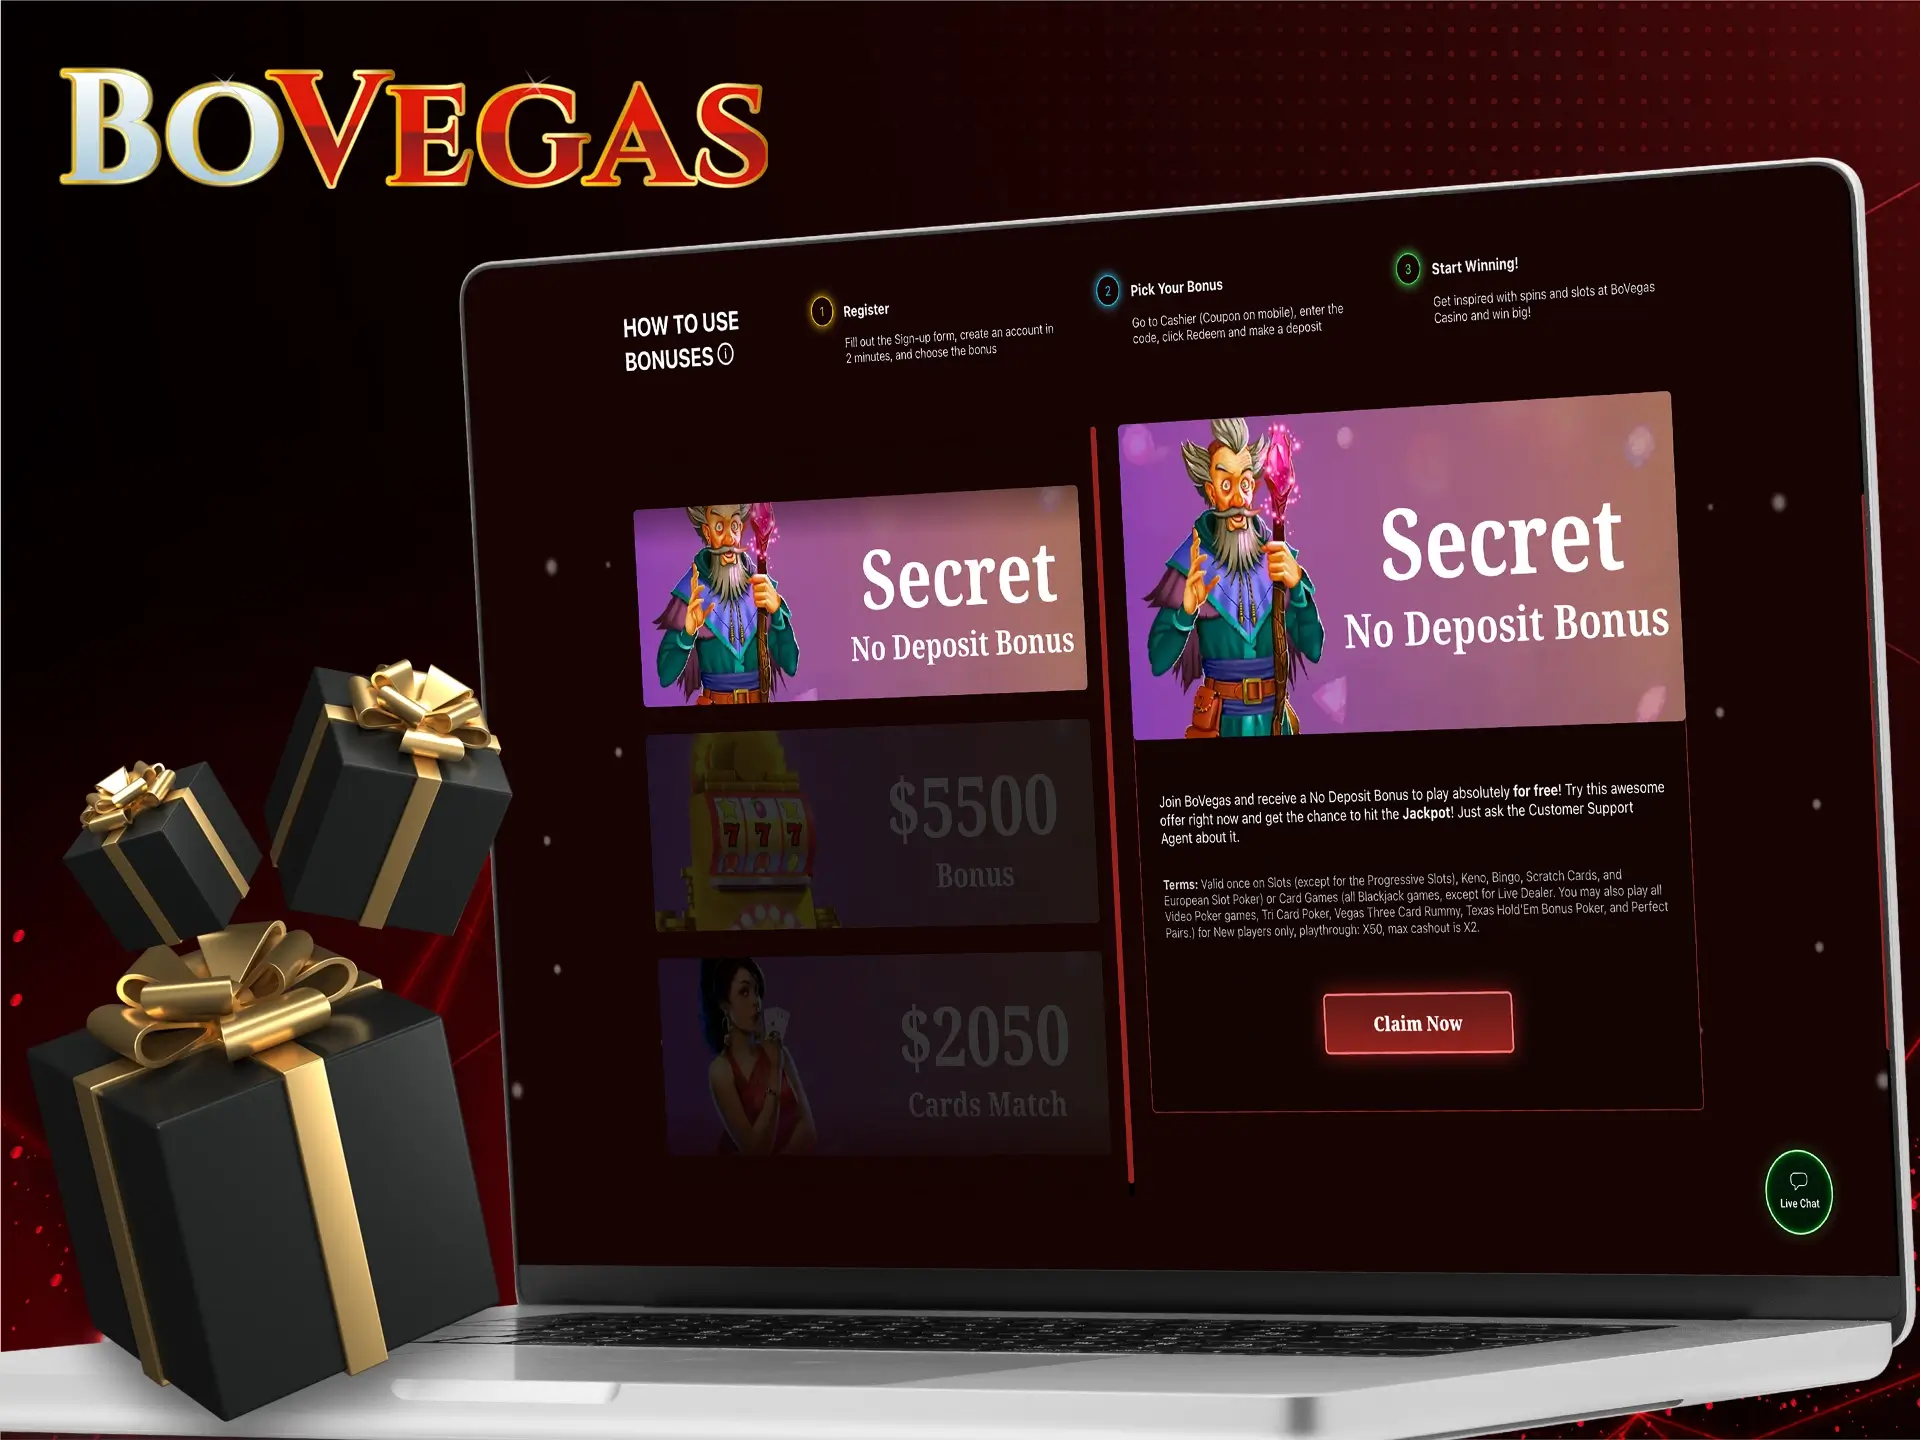 BoVegas Casino has a no deposit bonus that will help you try your hand without spending any money.